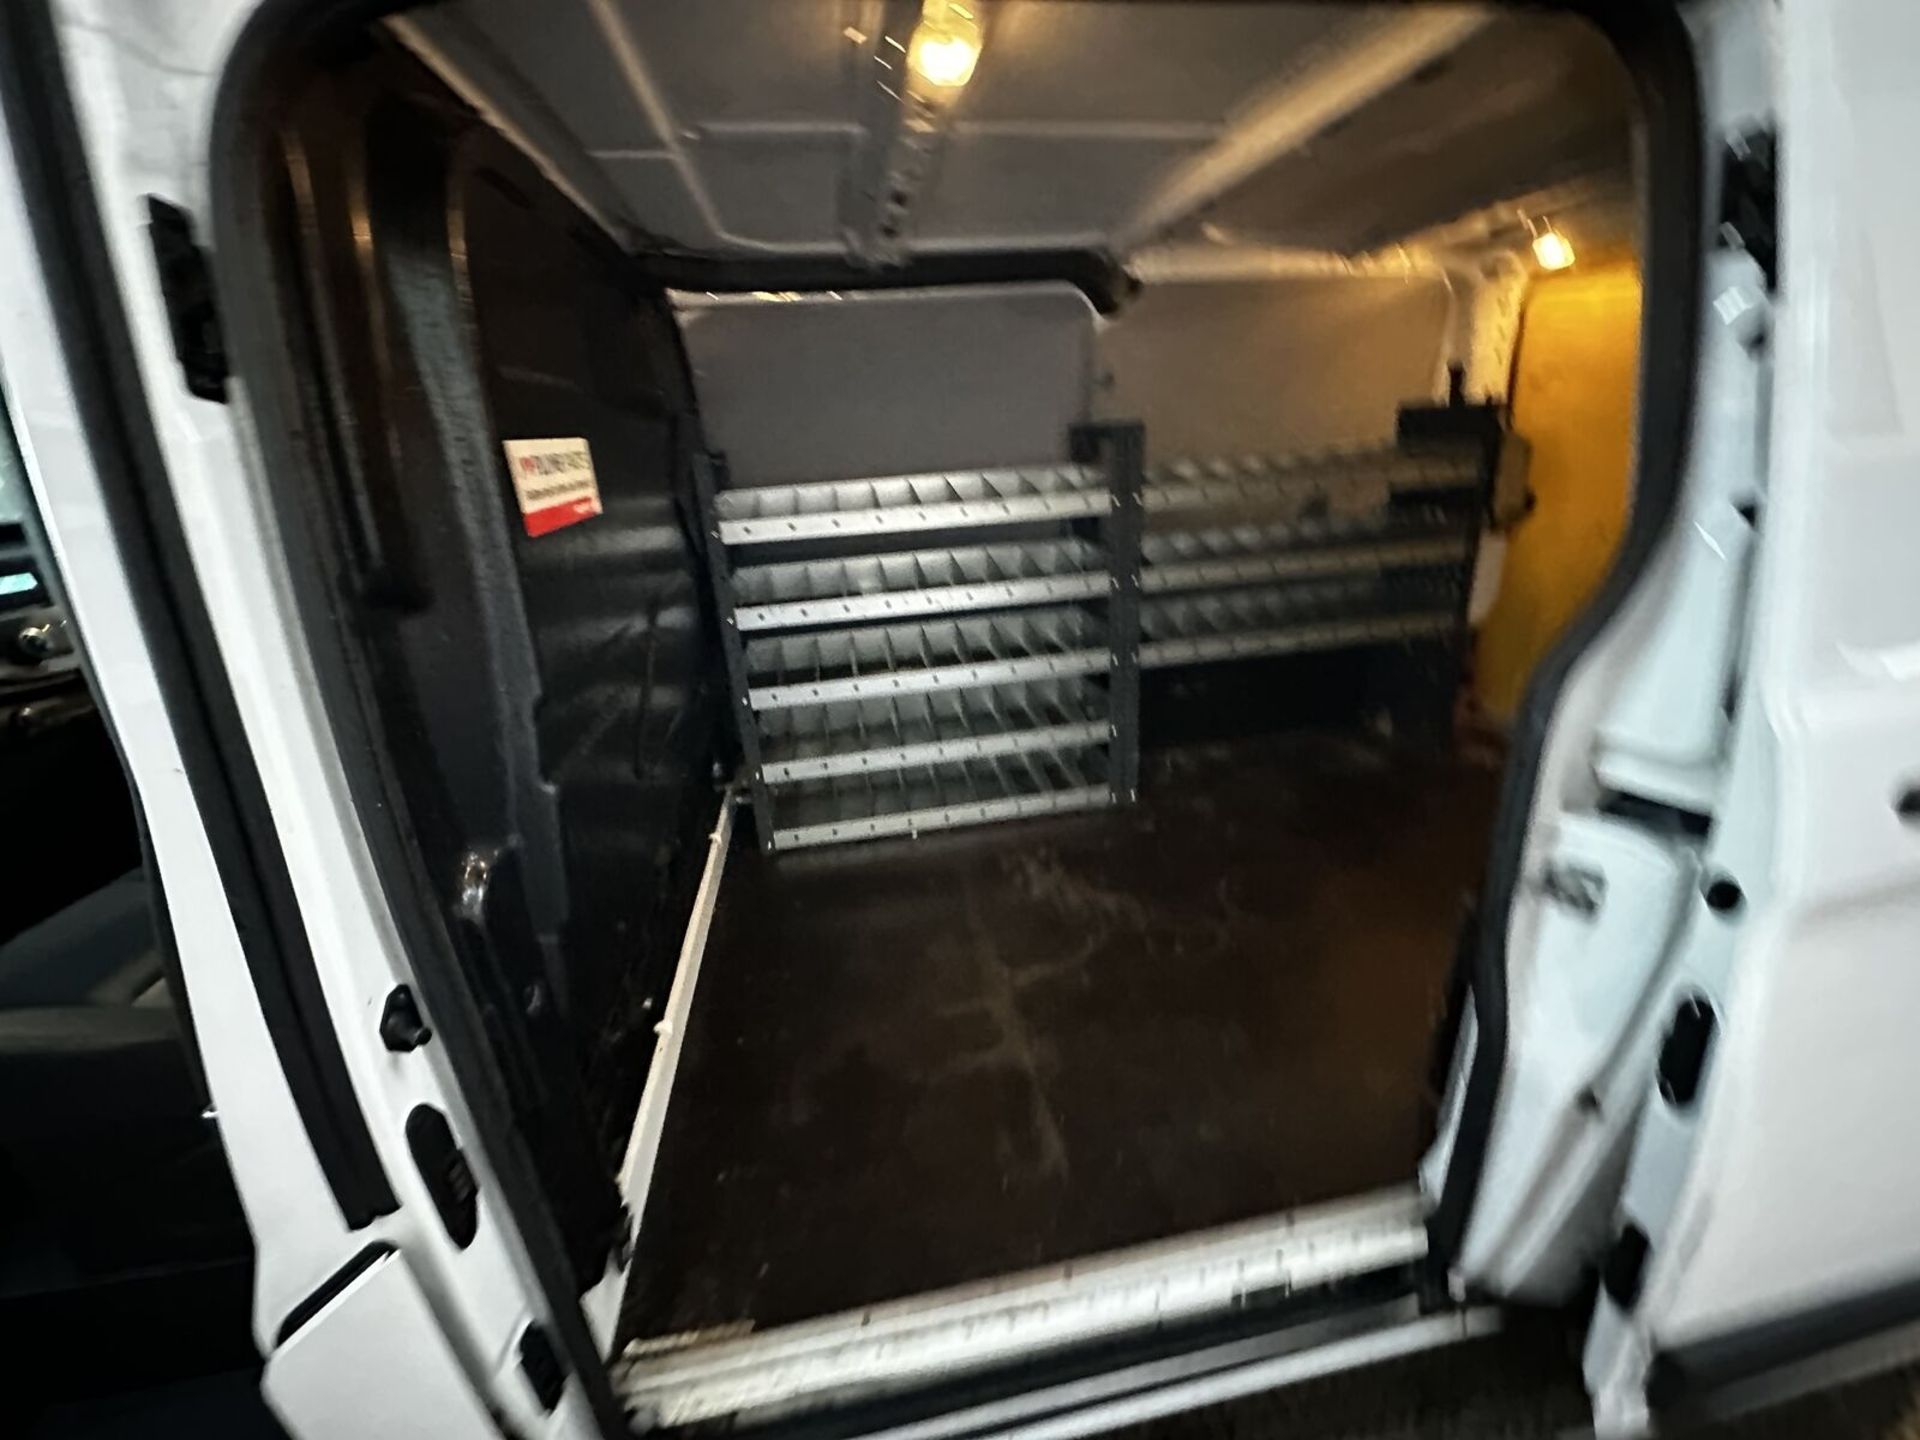 WHITE RHINO: 2019 FORD TRANSIT CUSTOM 300 - CLEAN, RELIABLE WORKHORSE - Image 6 of 12